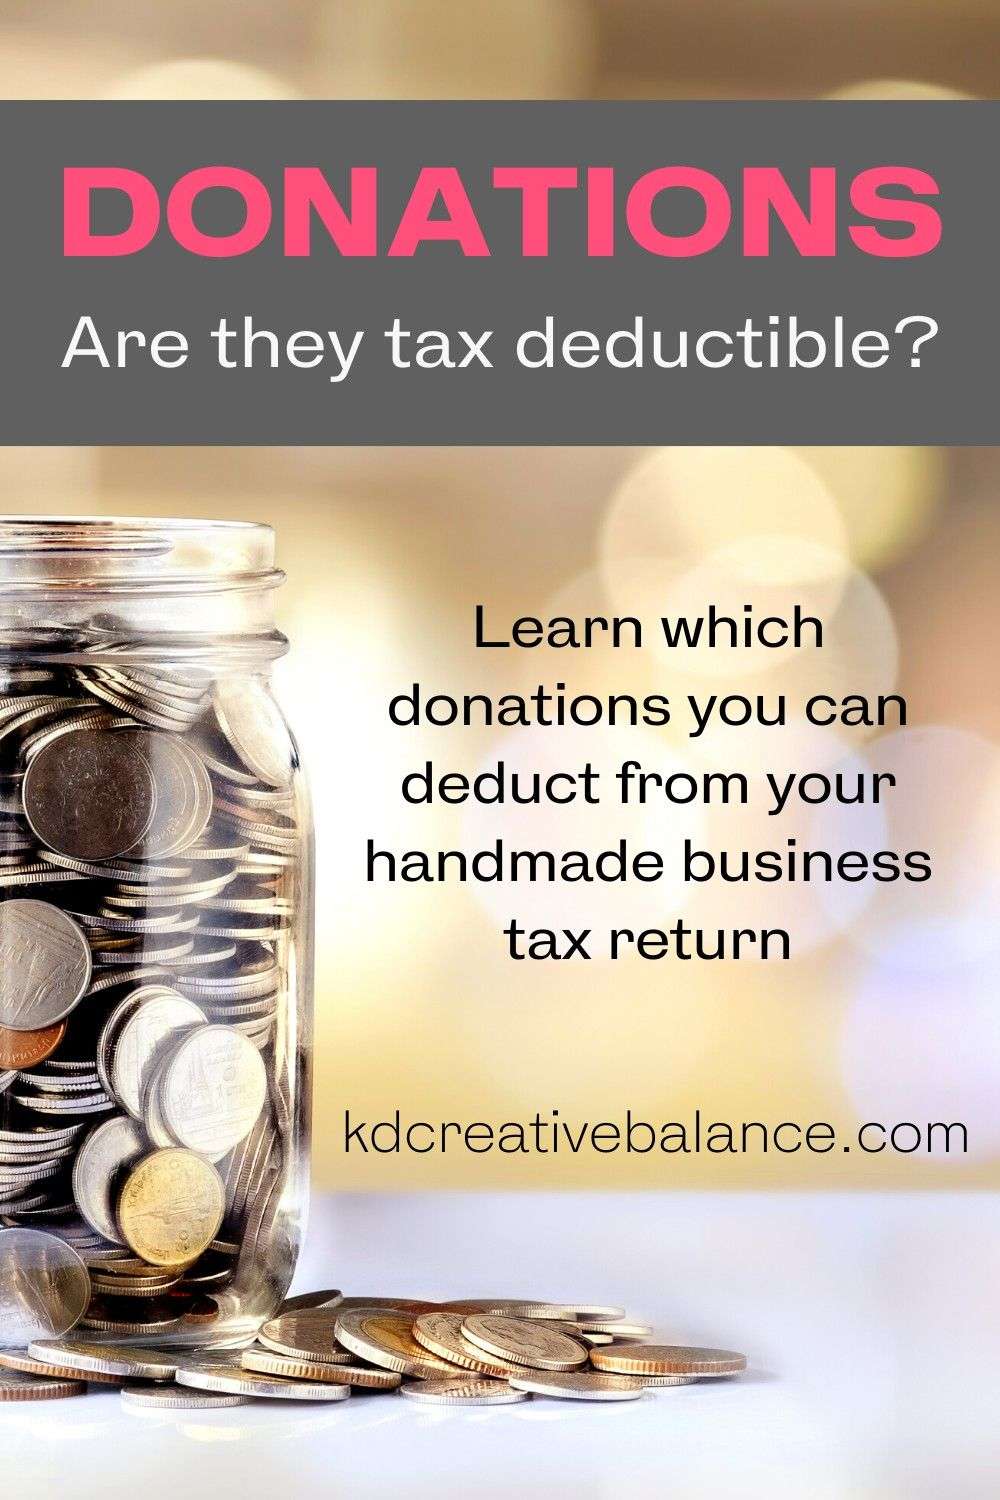 Learn which donations you can deduct from your tax return ...